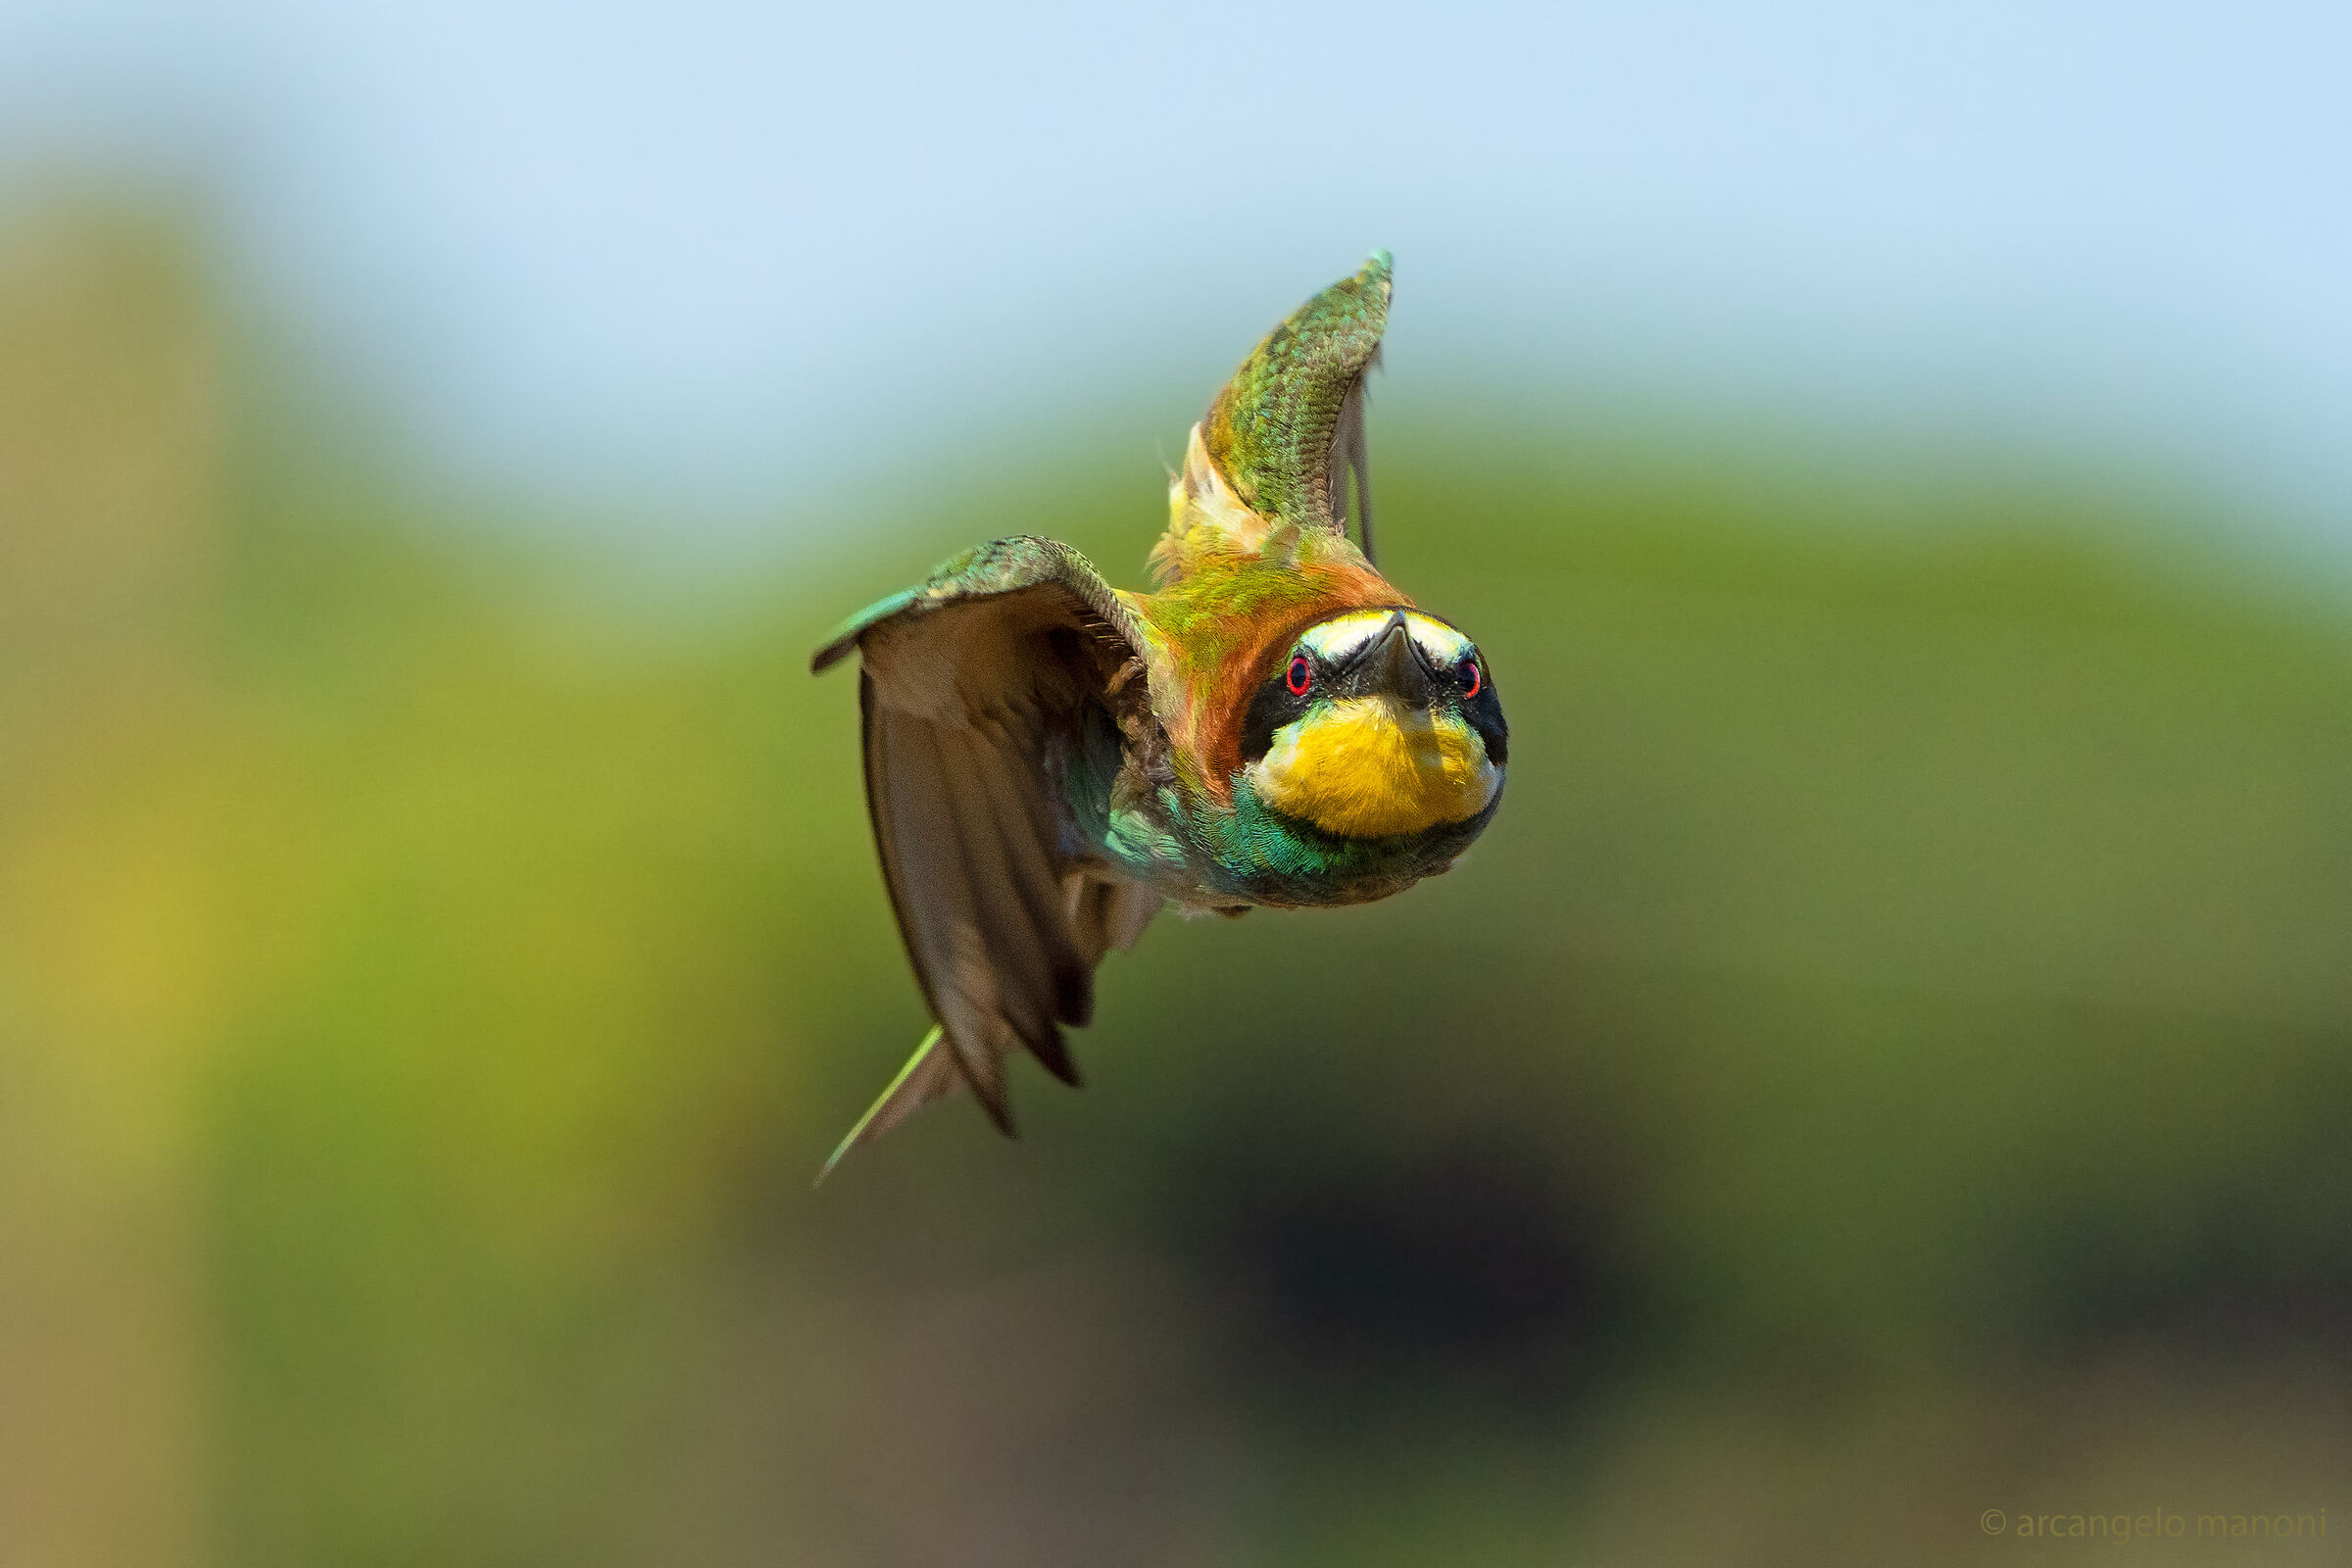 The bee-eater missile...